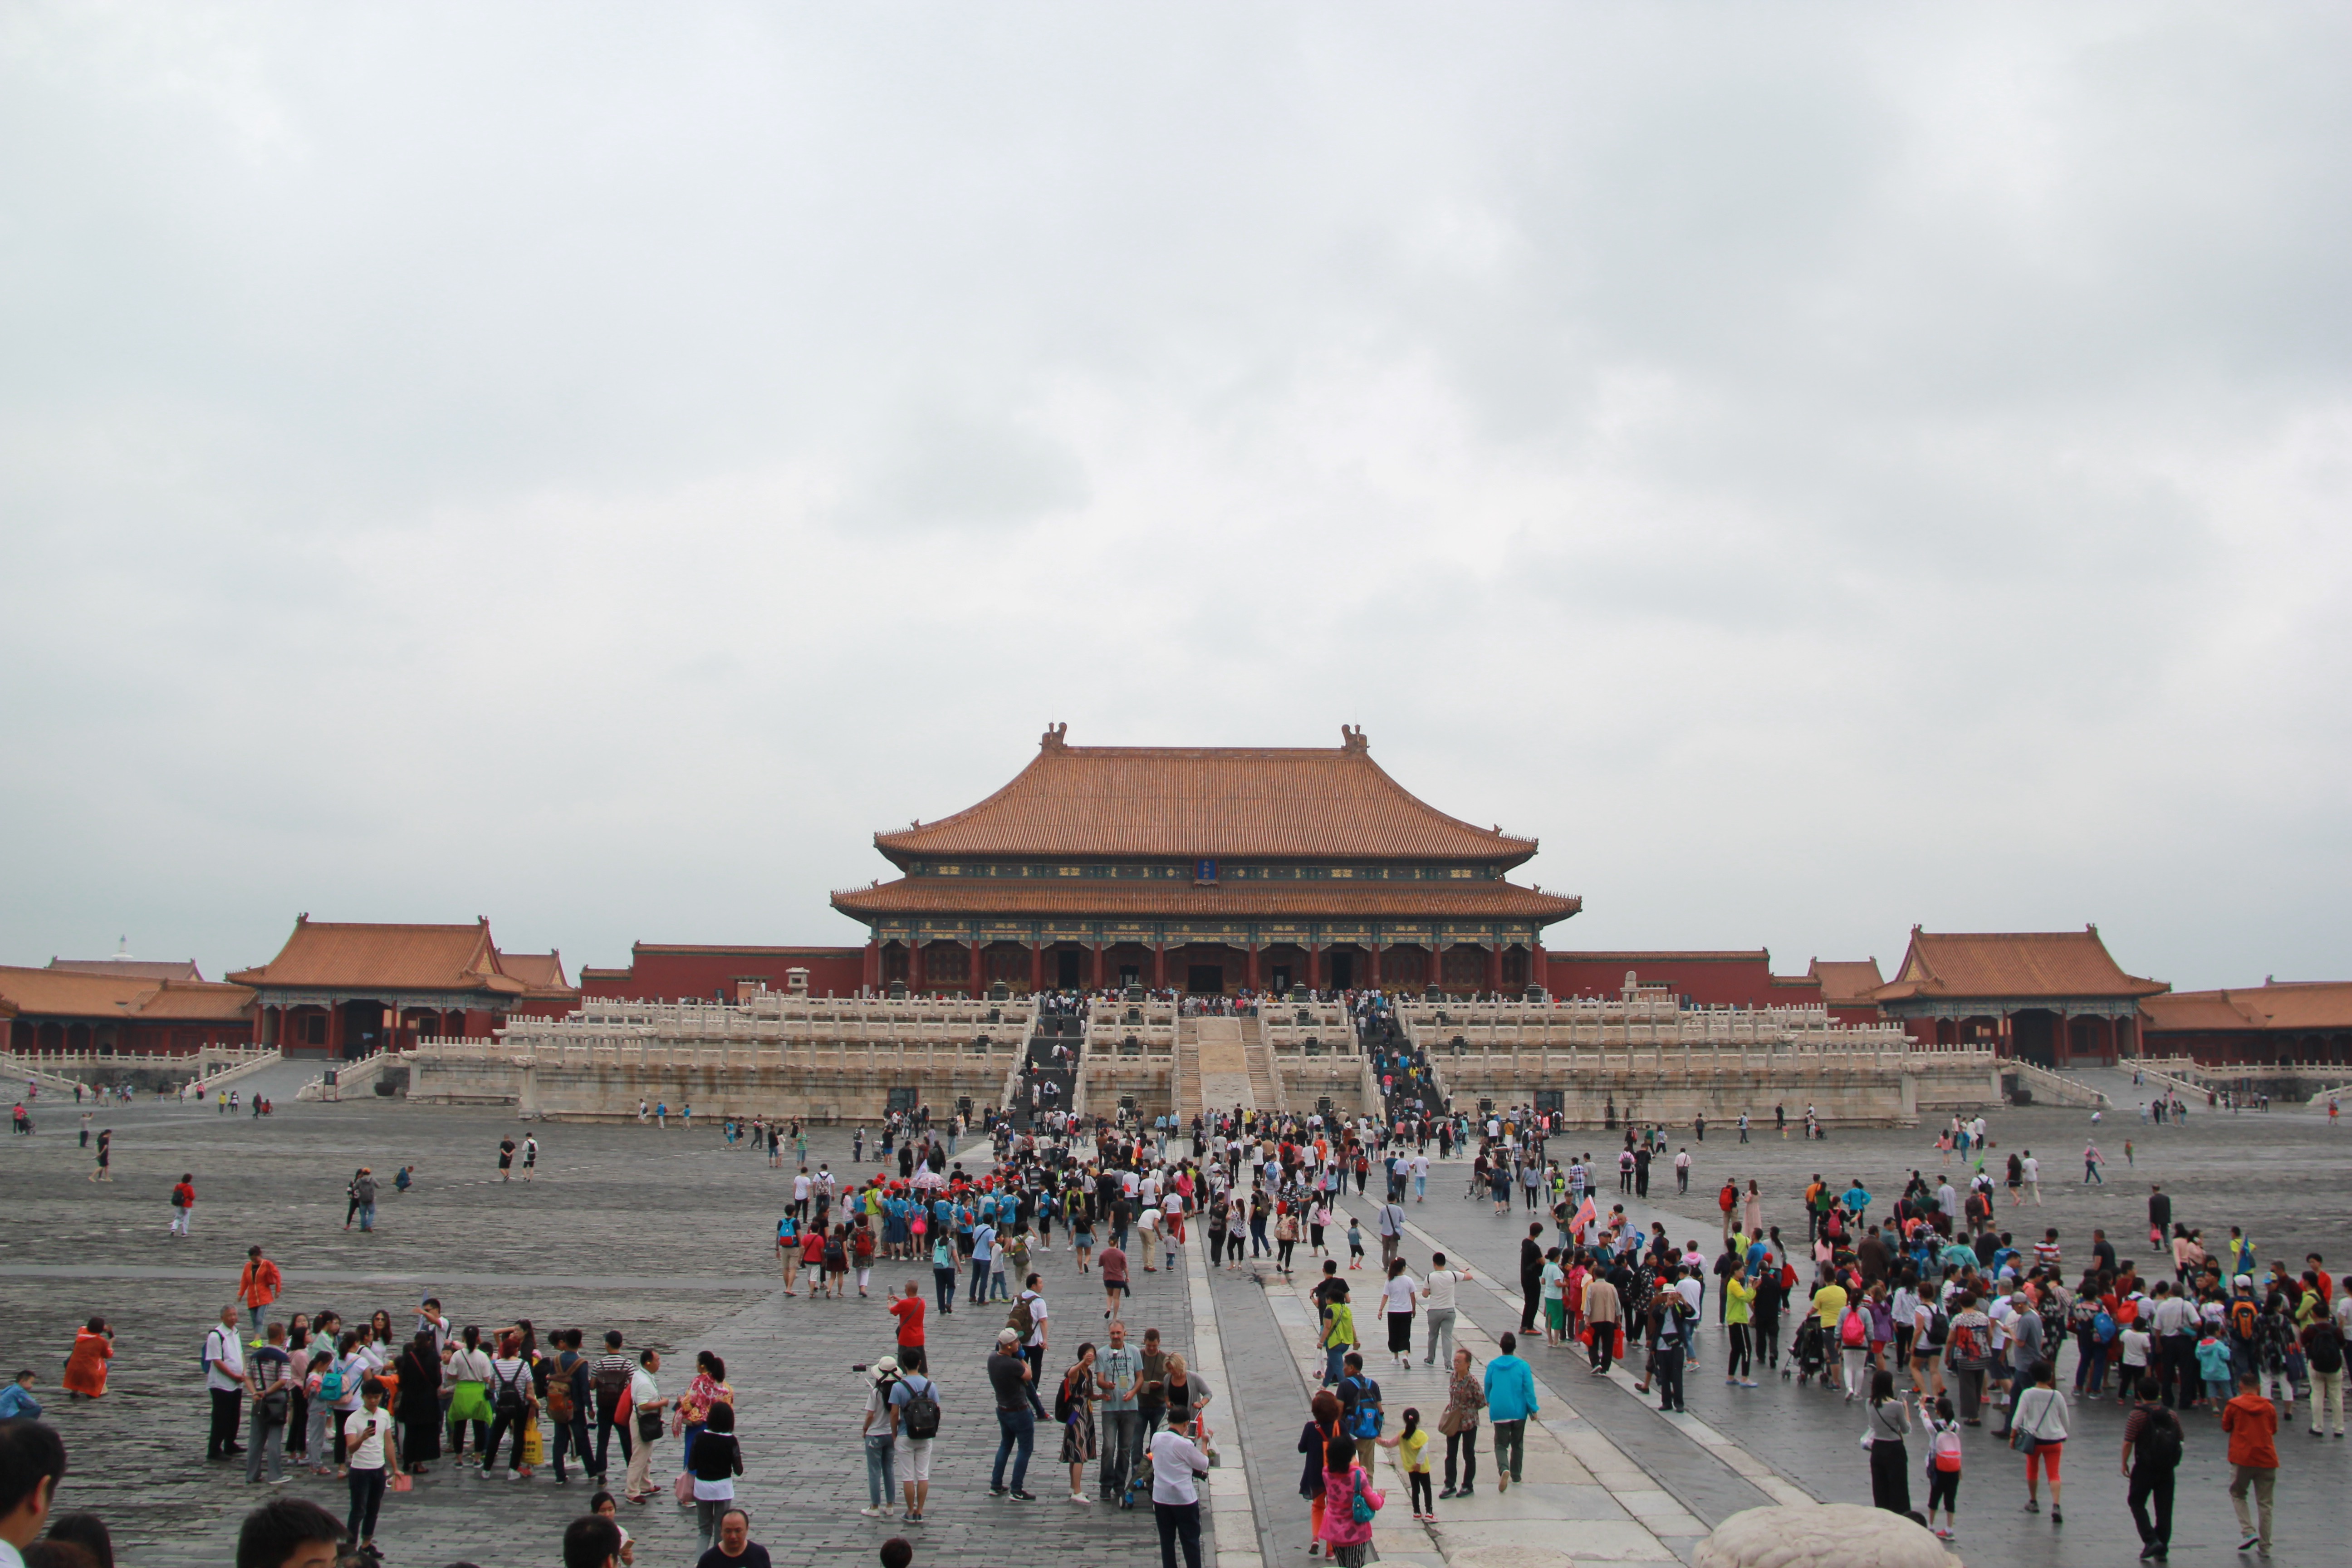 Day 3: Entering the “Forbidden City” in Beijing, China